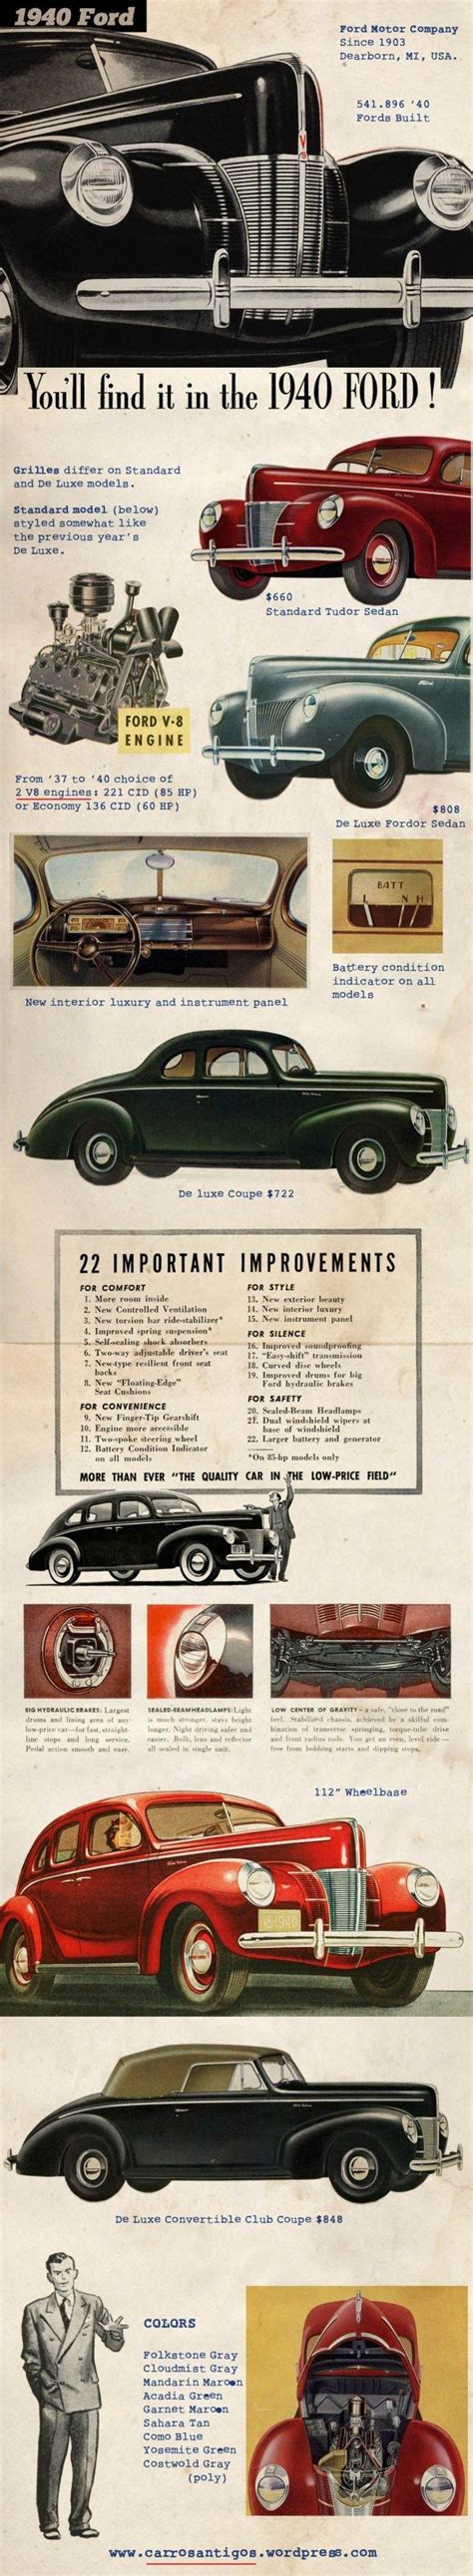 Car Advertising Car Ads Ford Motor Company Vintage Advertisements